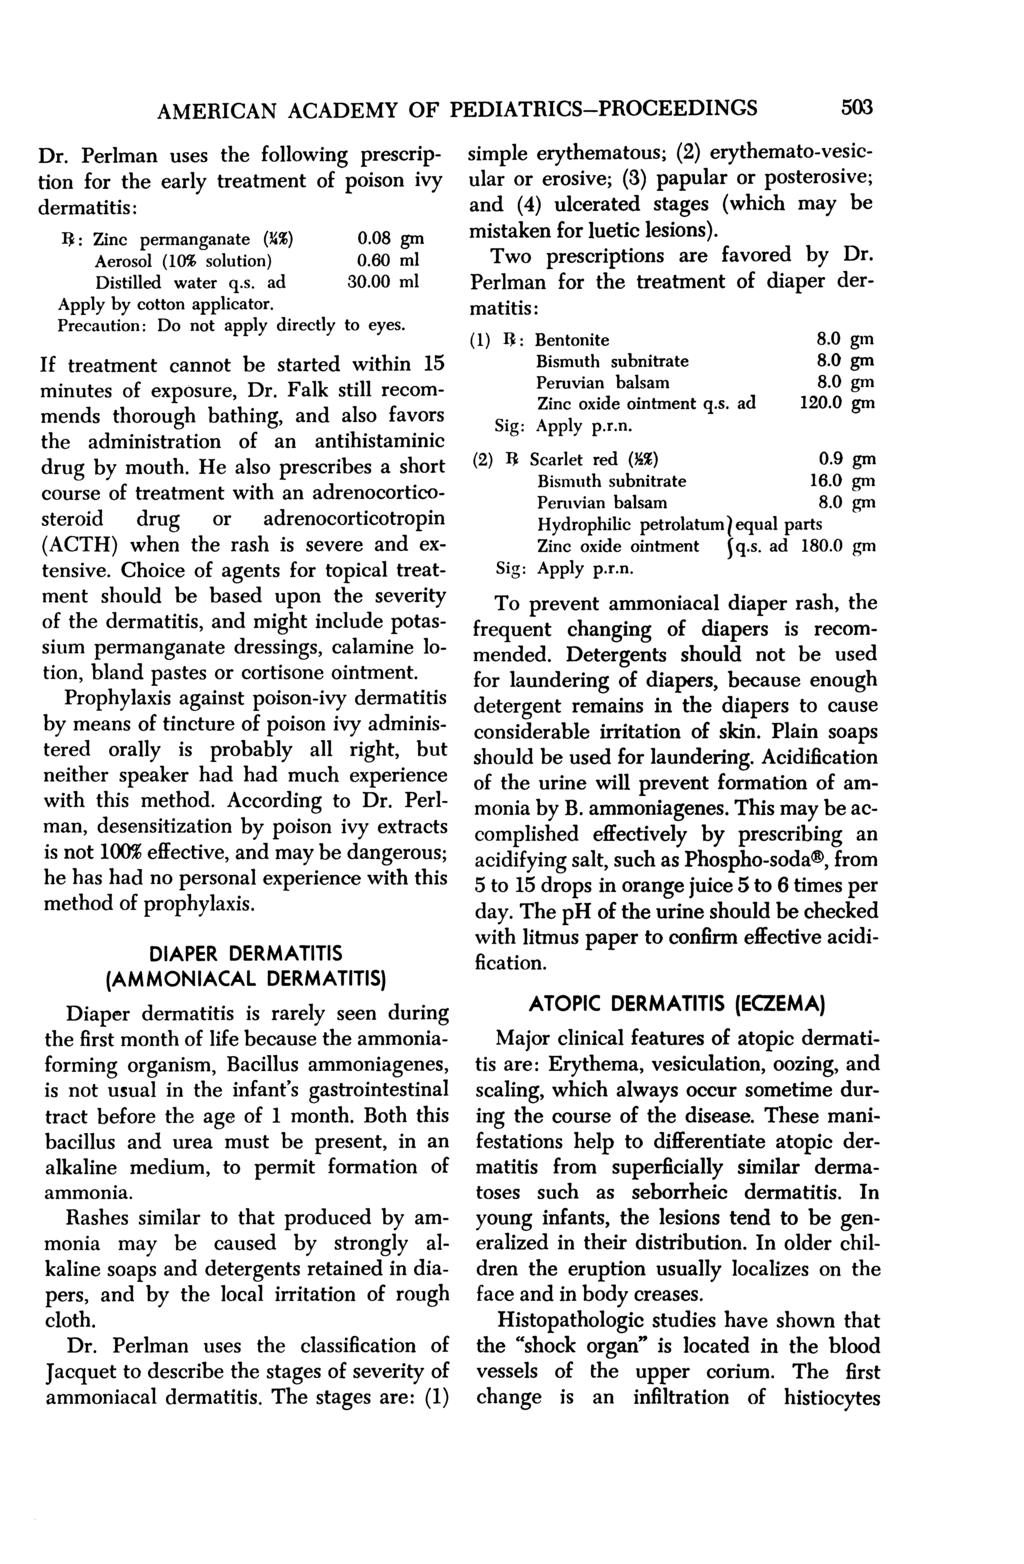 AMERICAN ACADEMY OF PEDIATRICS-PROCEEDINGS 503 Dr. Perlman uses the following prescniption for the early treatment of poison ivy dermatitis: 1 : Zinc permanganate (3%) 0.